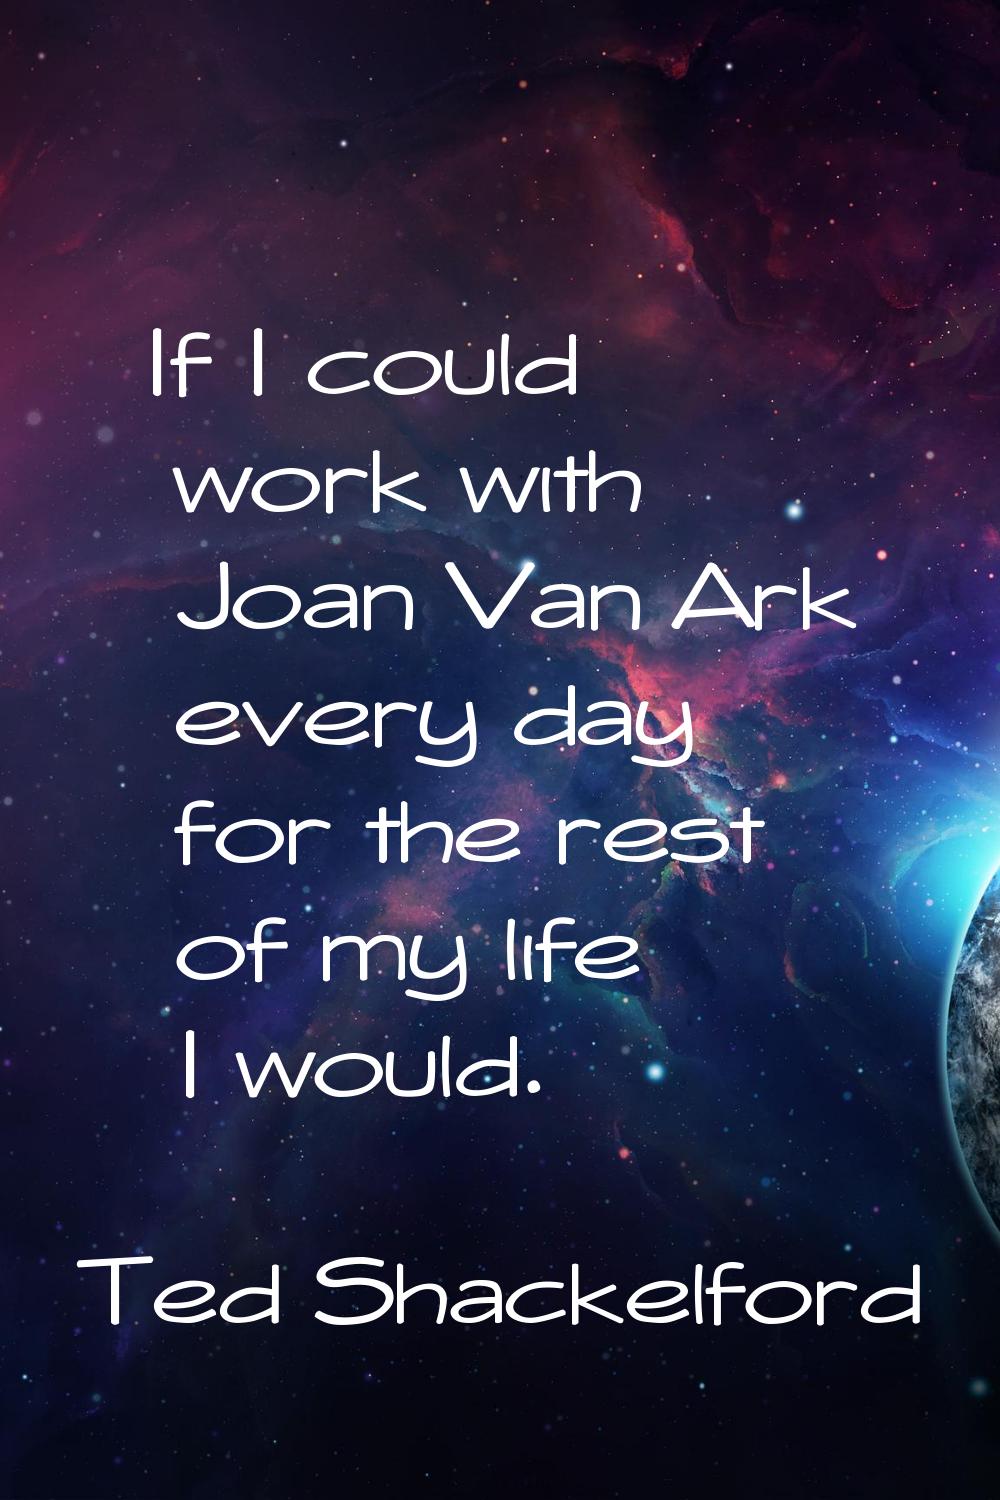 If I could work with Joan Van Ark every day for the rest of my life I would.